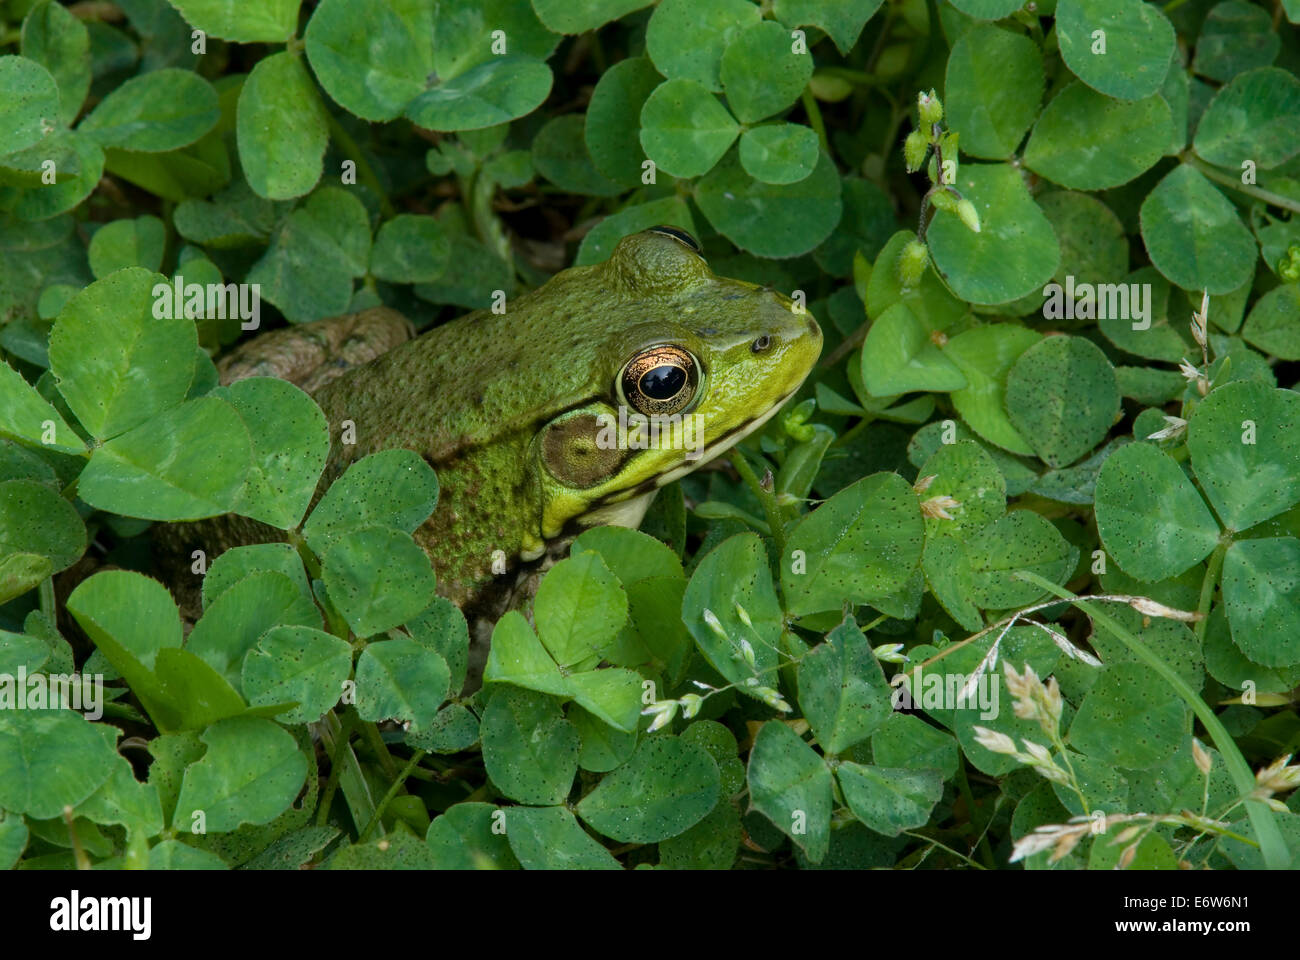 Green Frog (Rana or Lithobates clamitans) sitting in Clover plants (Trifolium)  Eastern North America Stock Photo